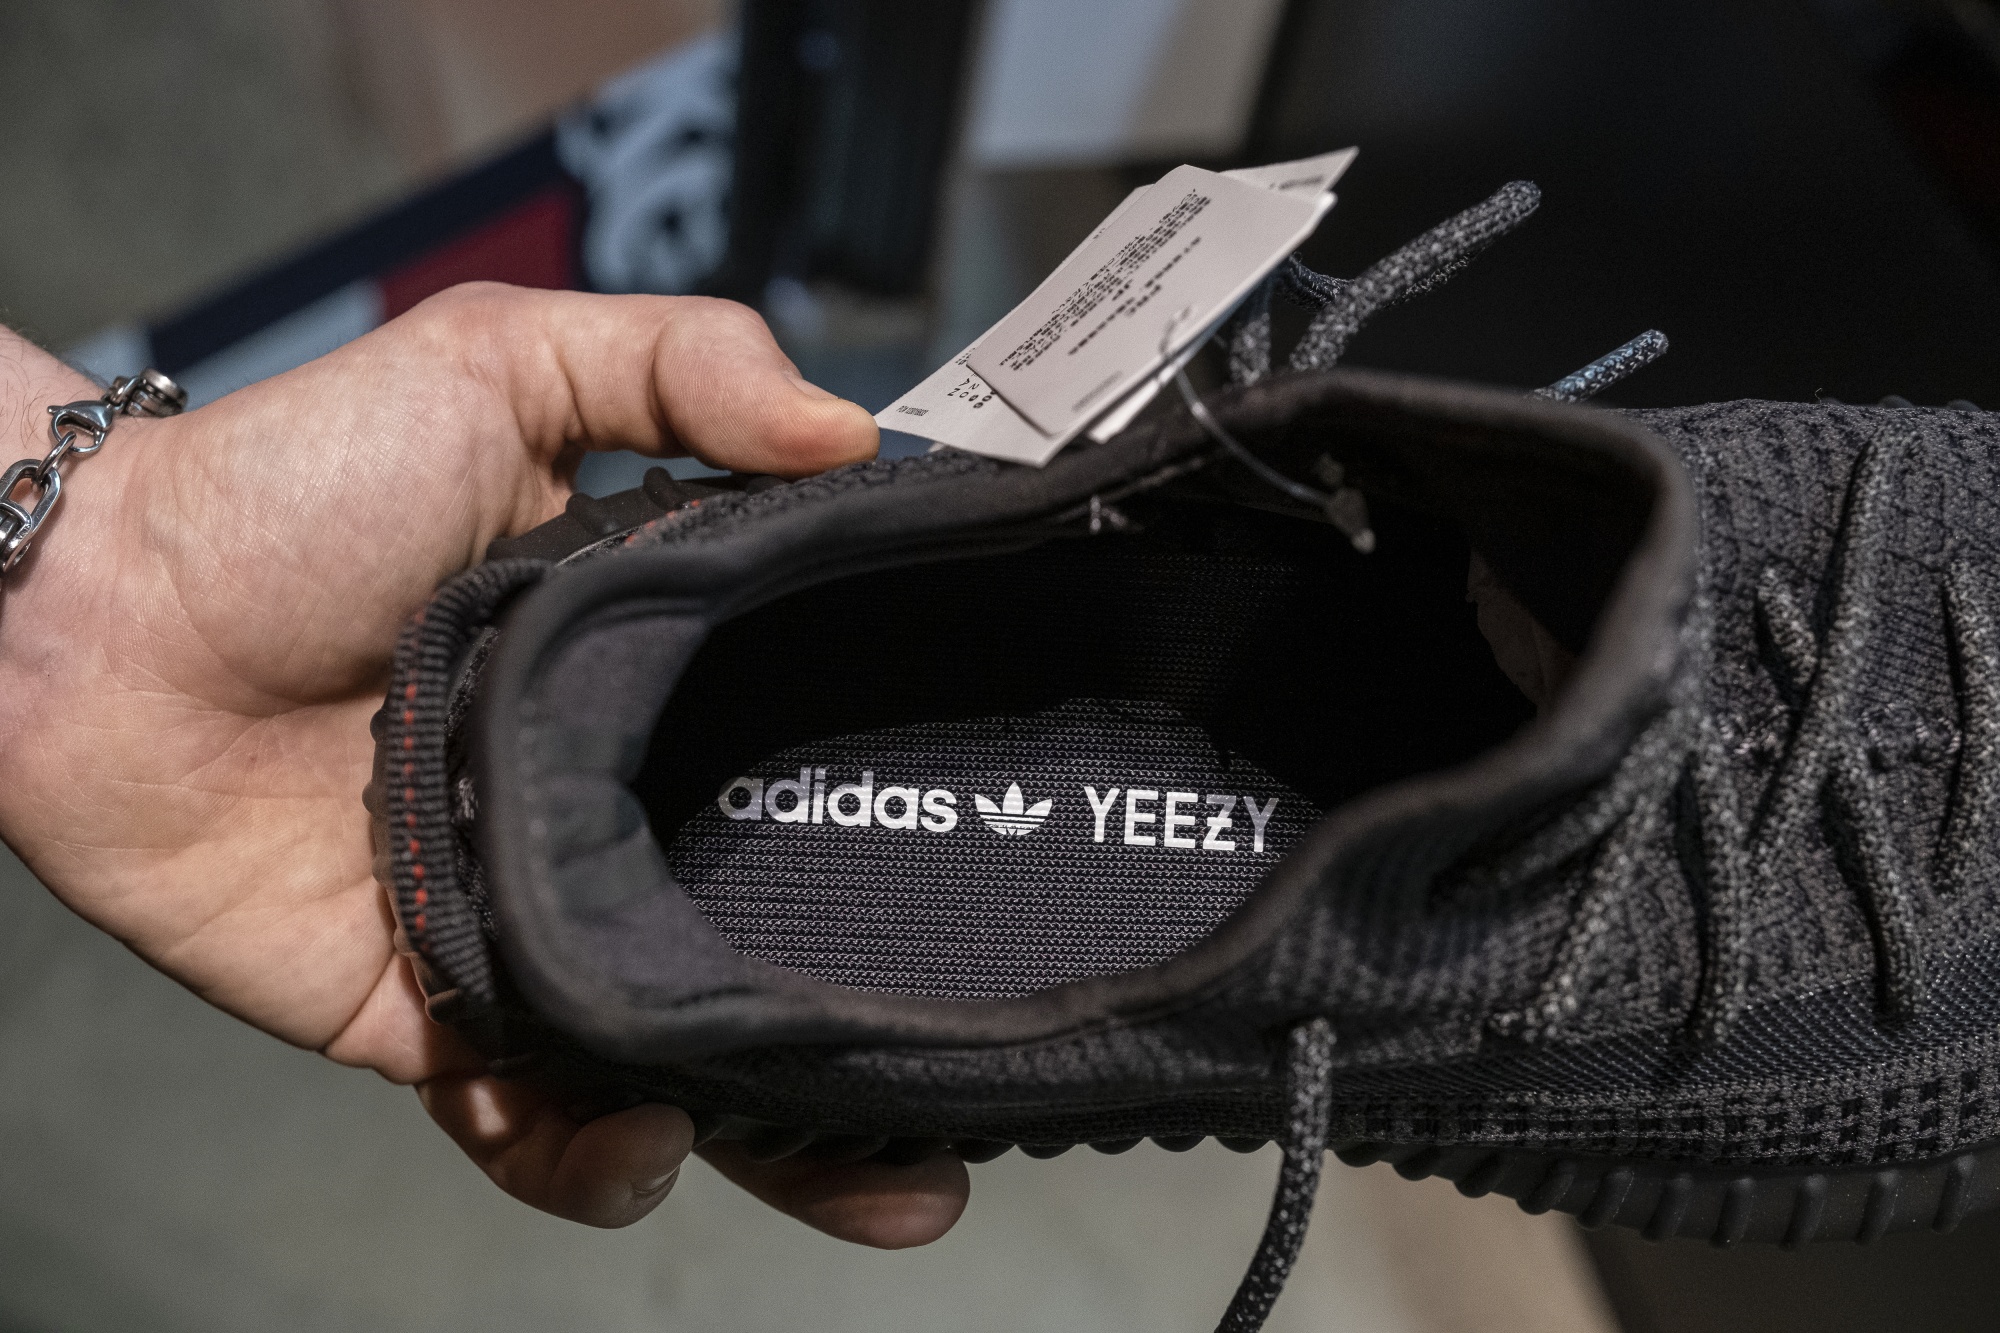 define yeezy and supreme shoes price guide, Arvind Sport